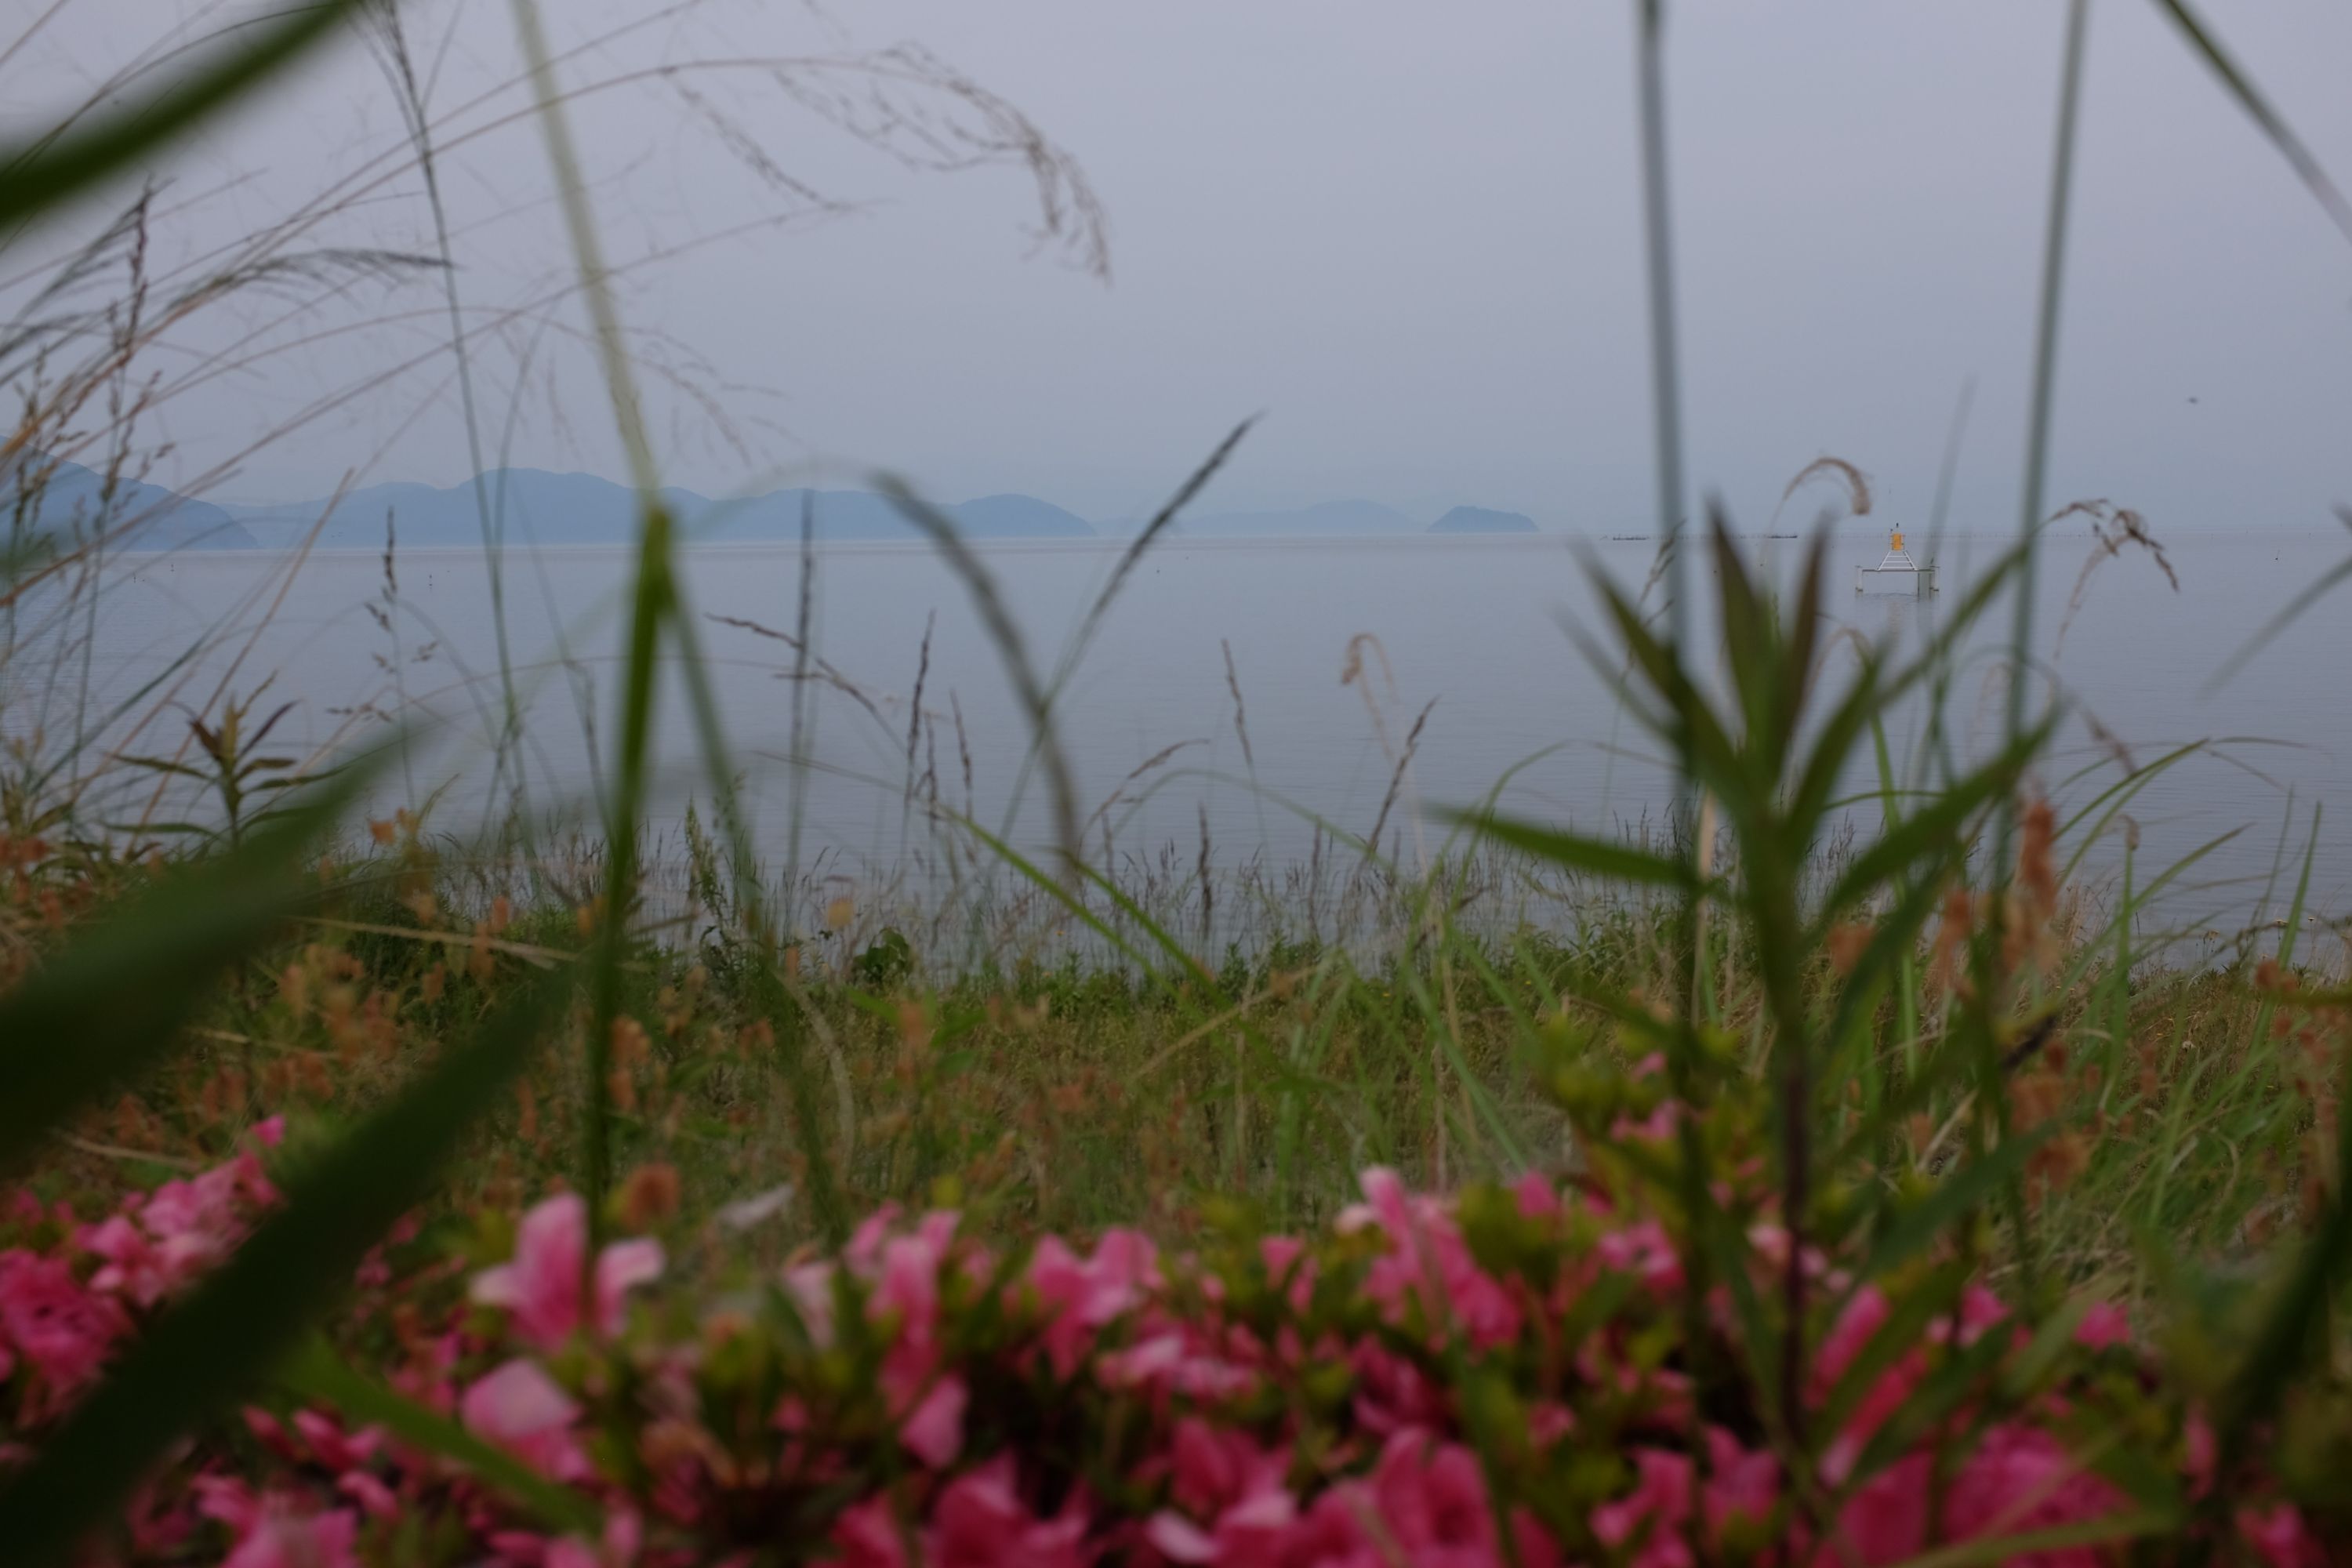 The view from a grassy beach on Lake Biwa.